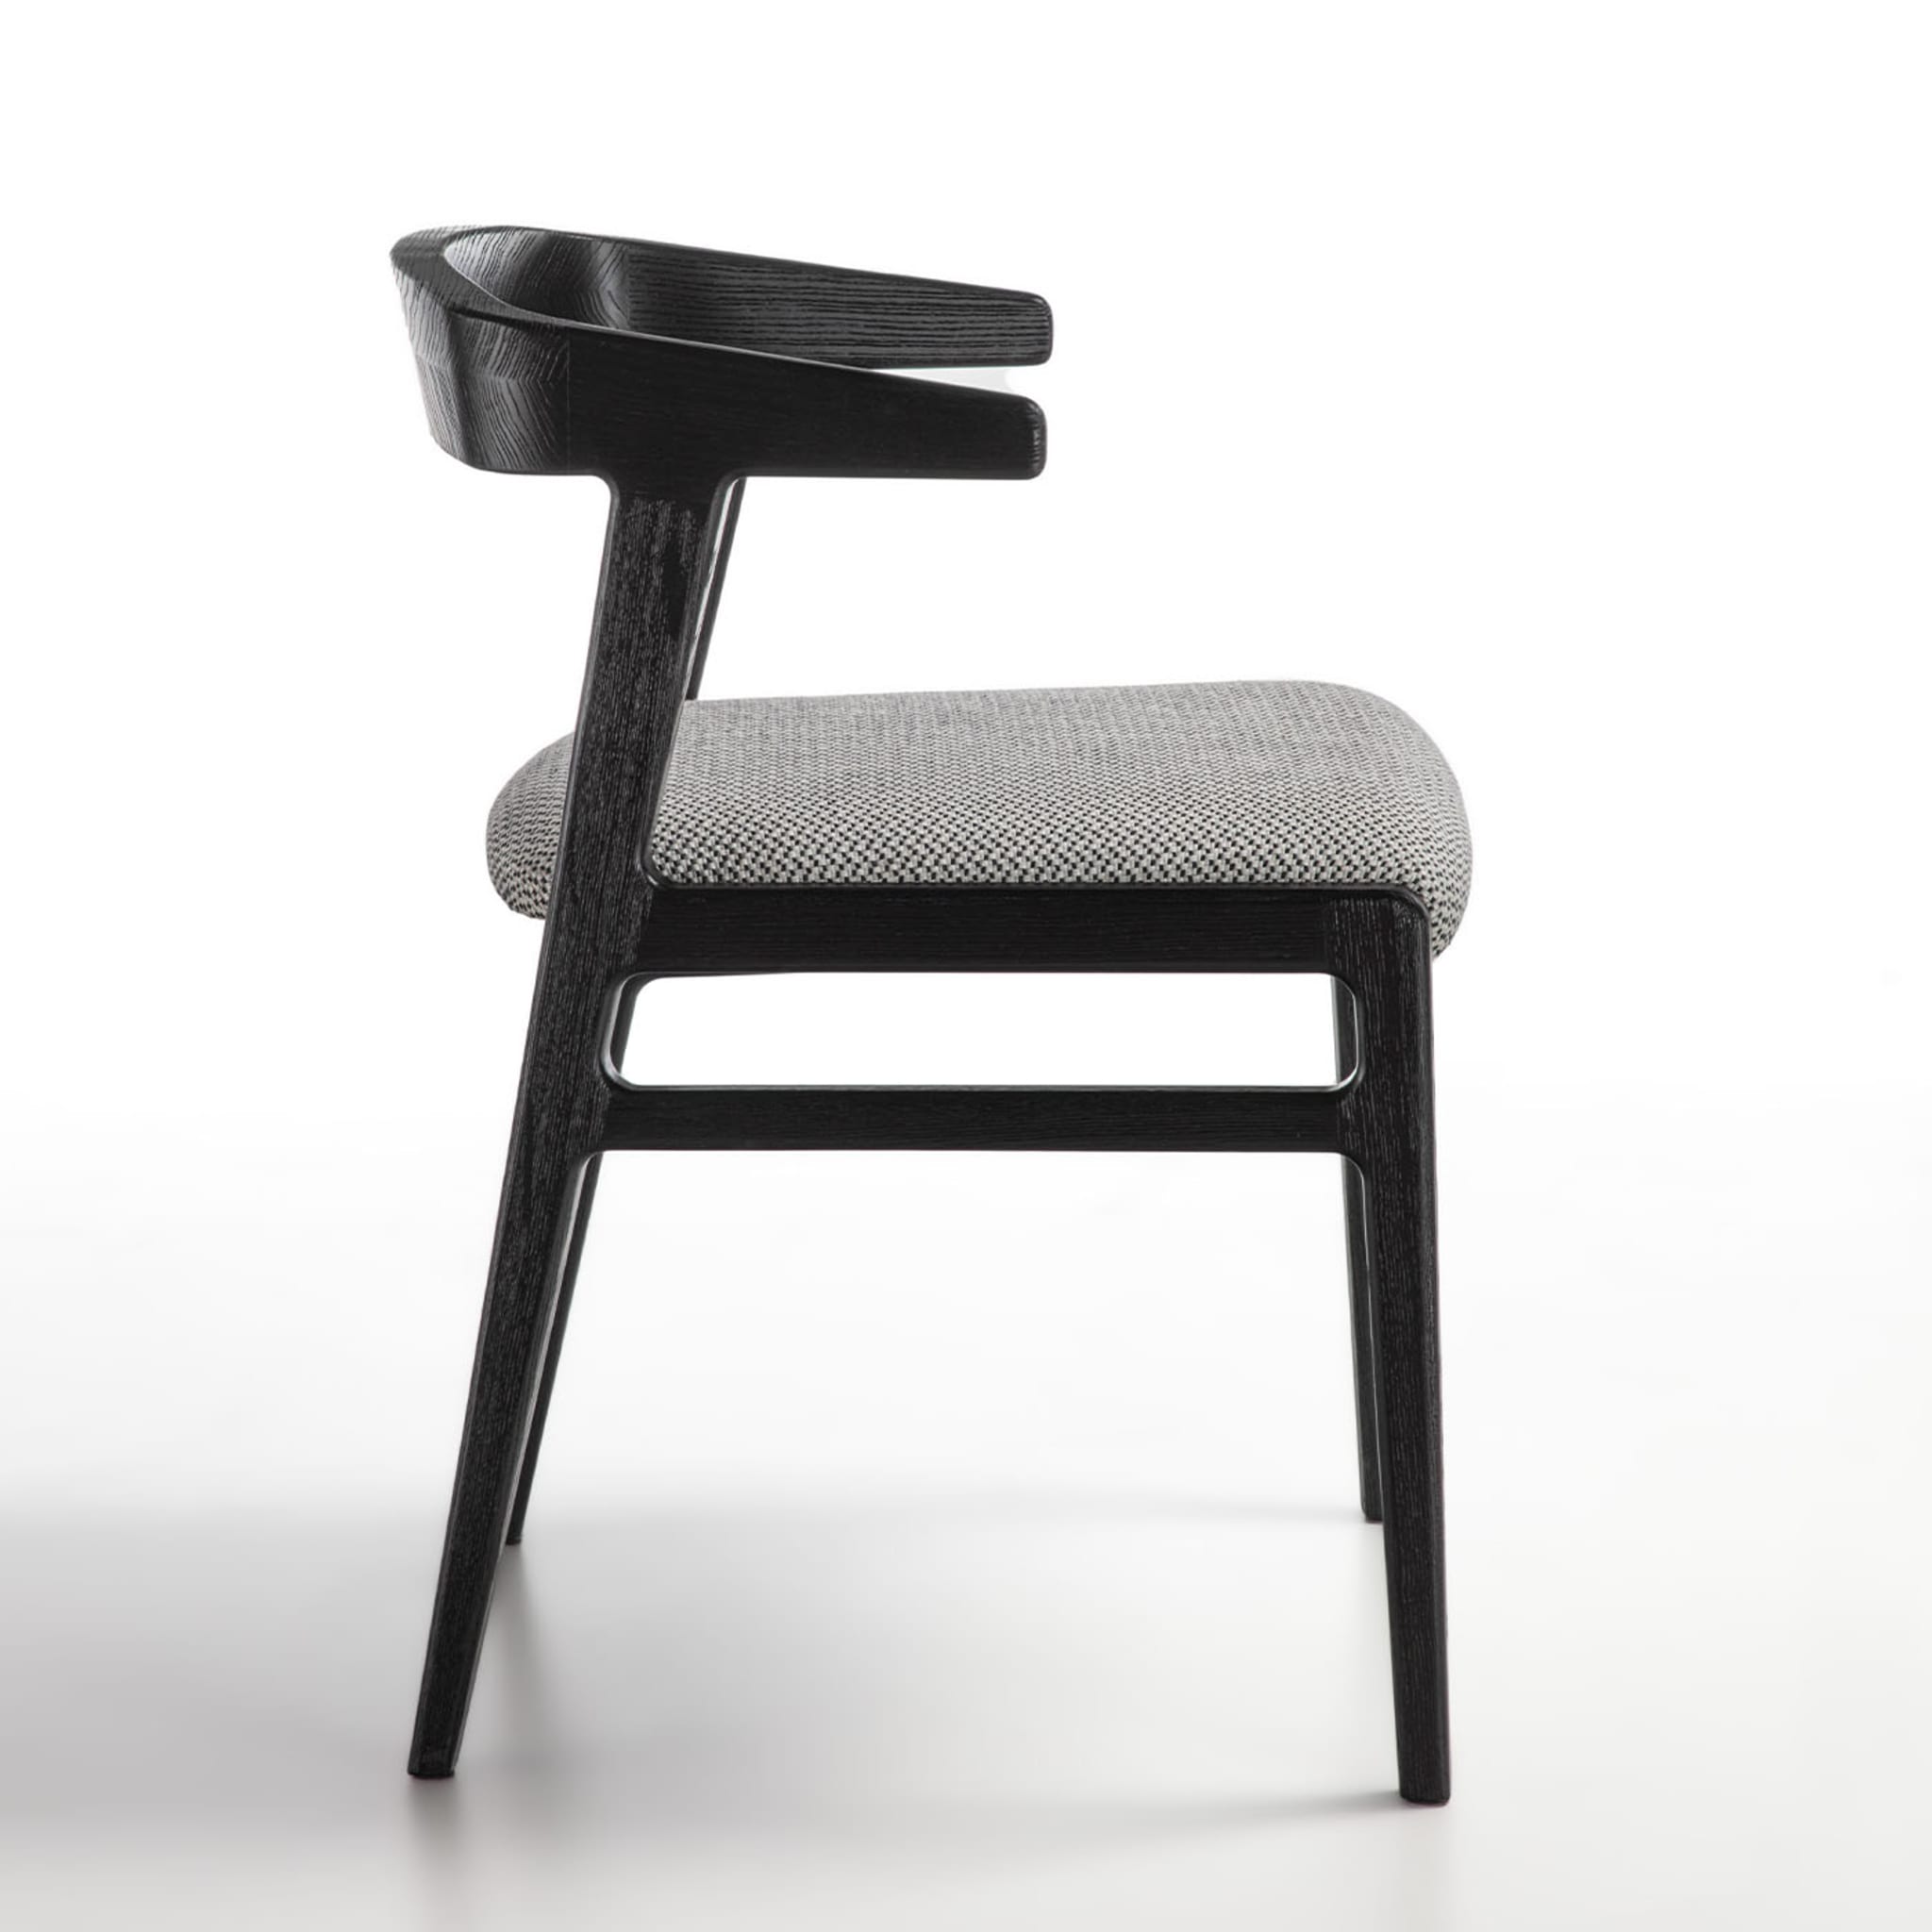 Aida Black Chair with Arms - Alternative view 1